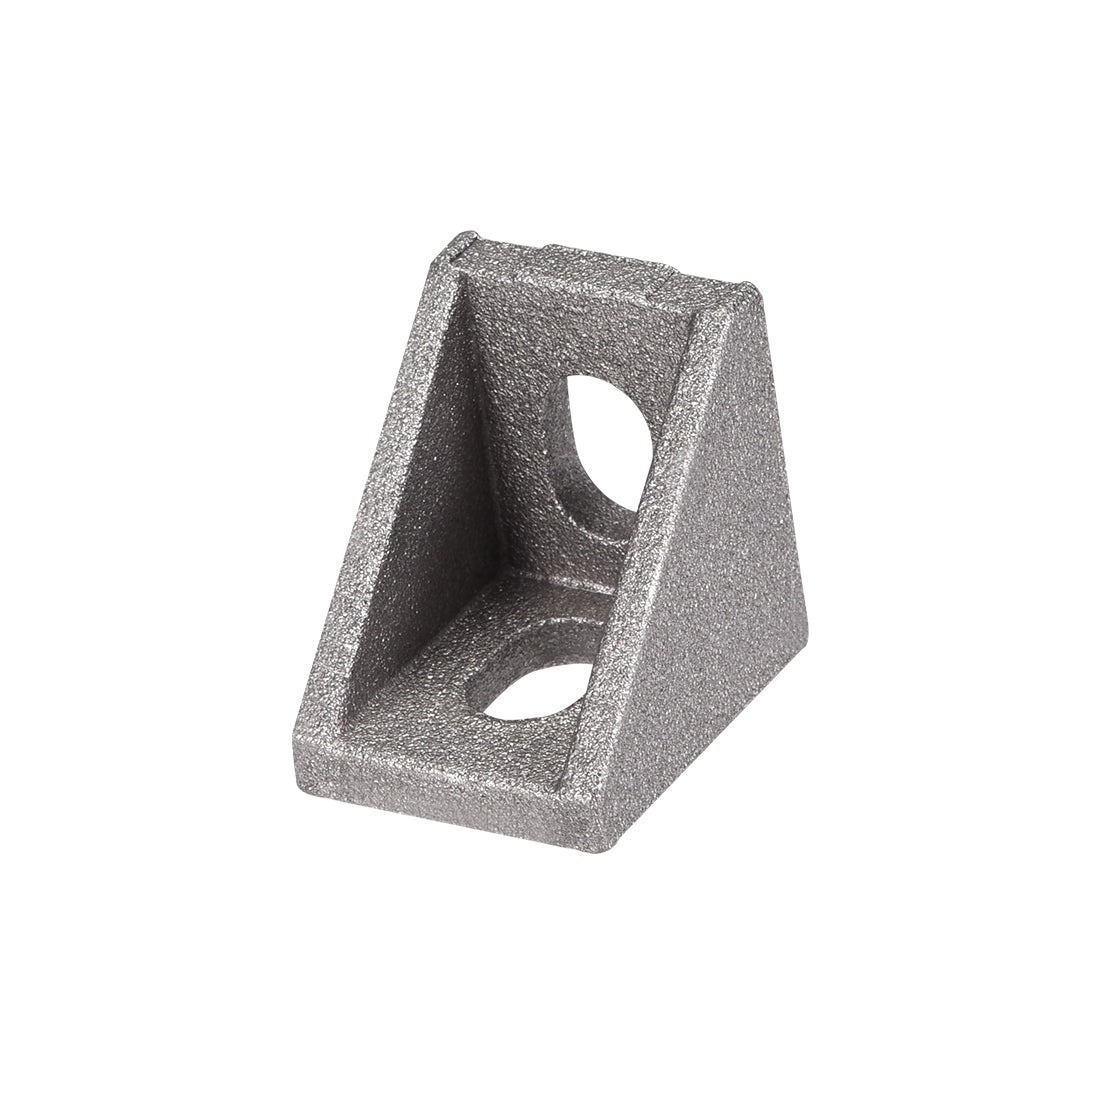 uxcell Uxcell Inside Corner Bracket Gusset, for 2020 Series Aluminum Extrusion Profile with Slot 6mm, 25 Pcs (Silver)